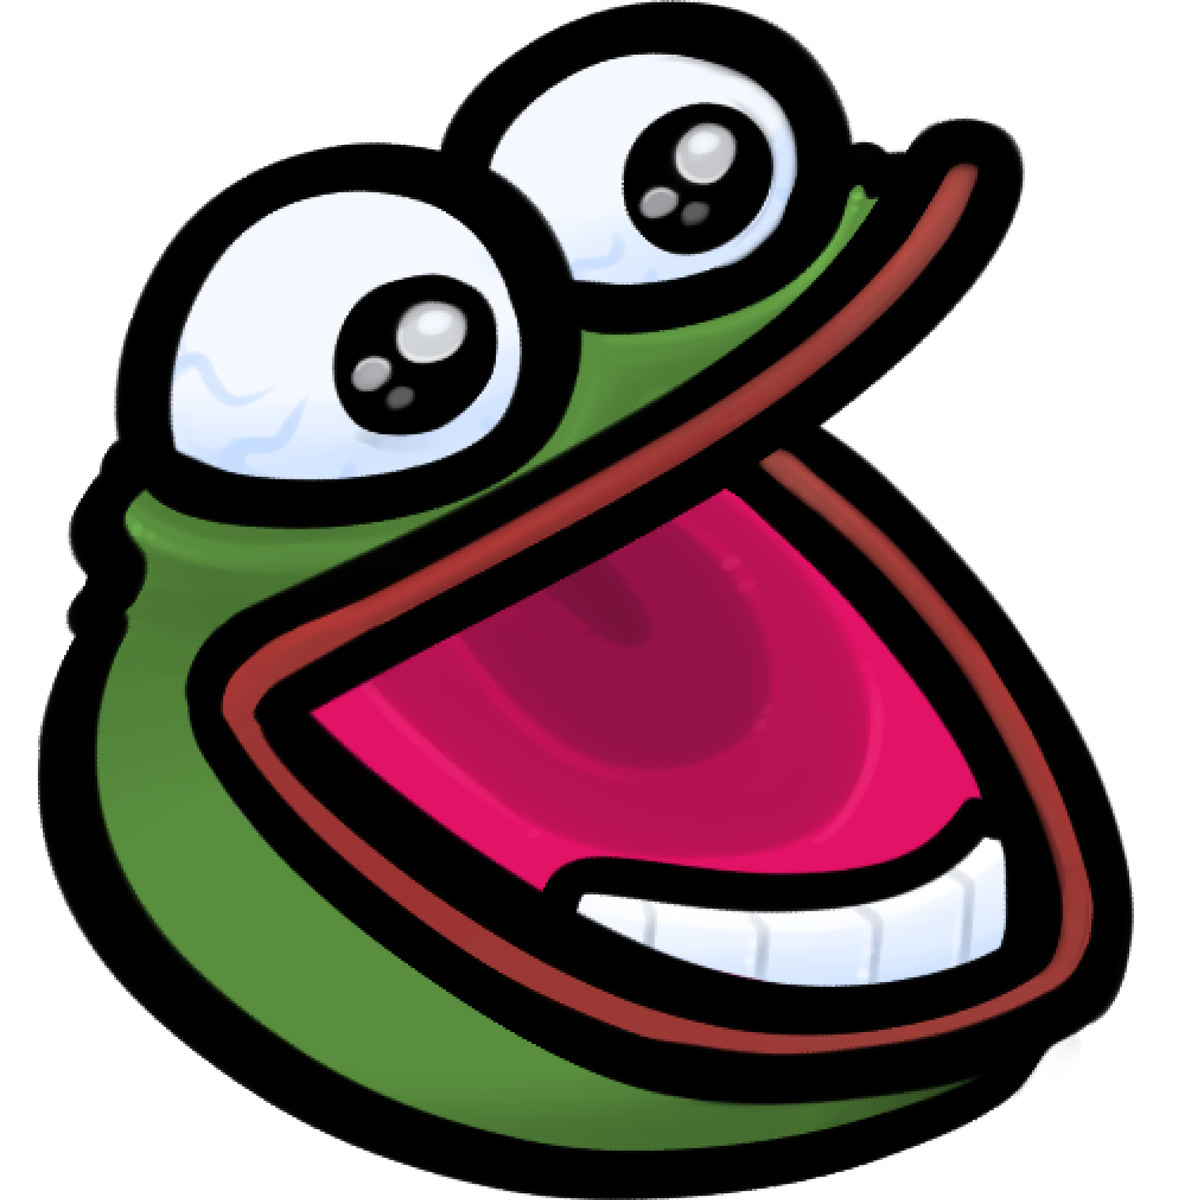 Pepe Emote Frog Amphibian The Twitch PNG Image